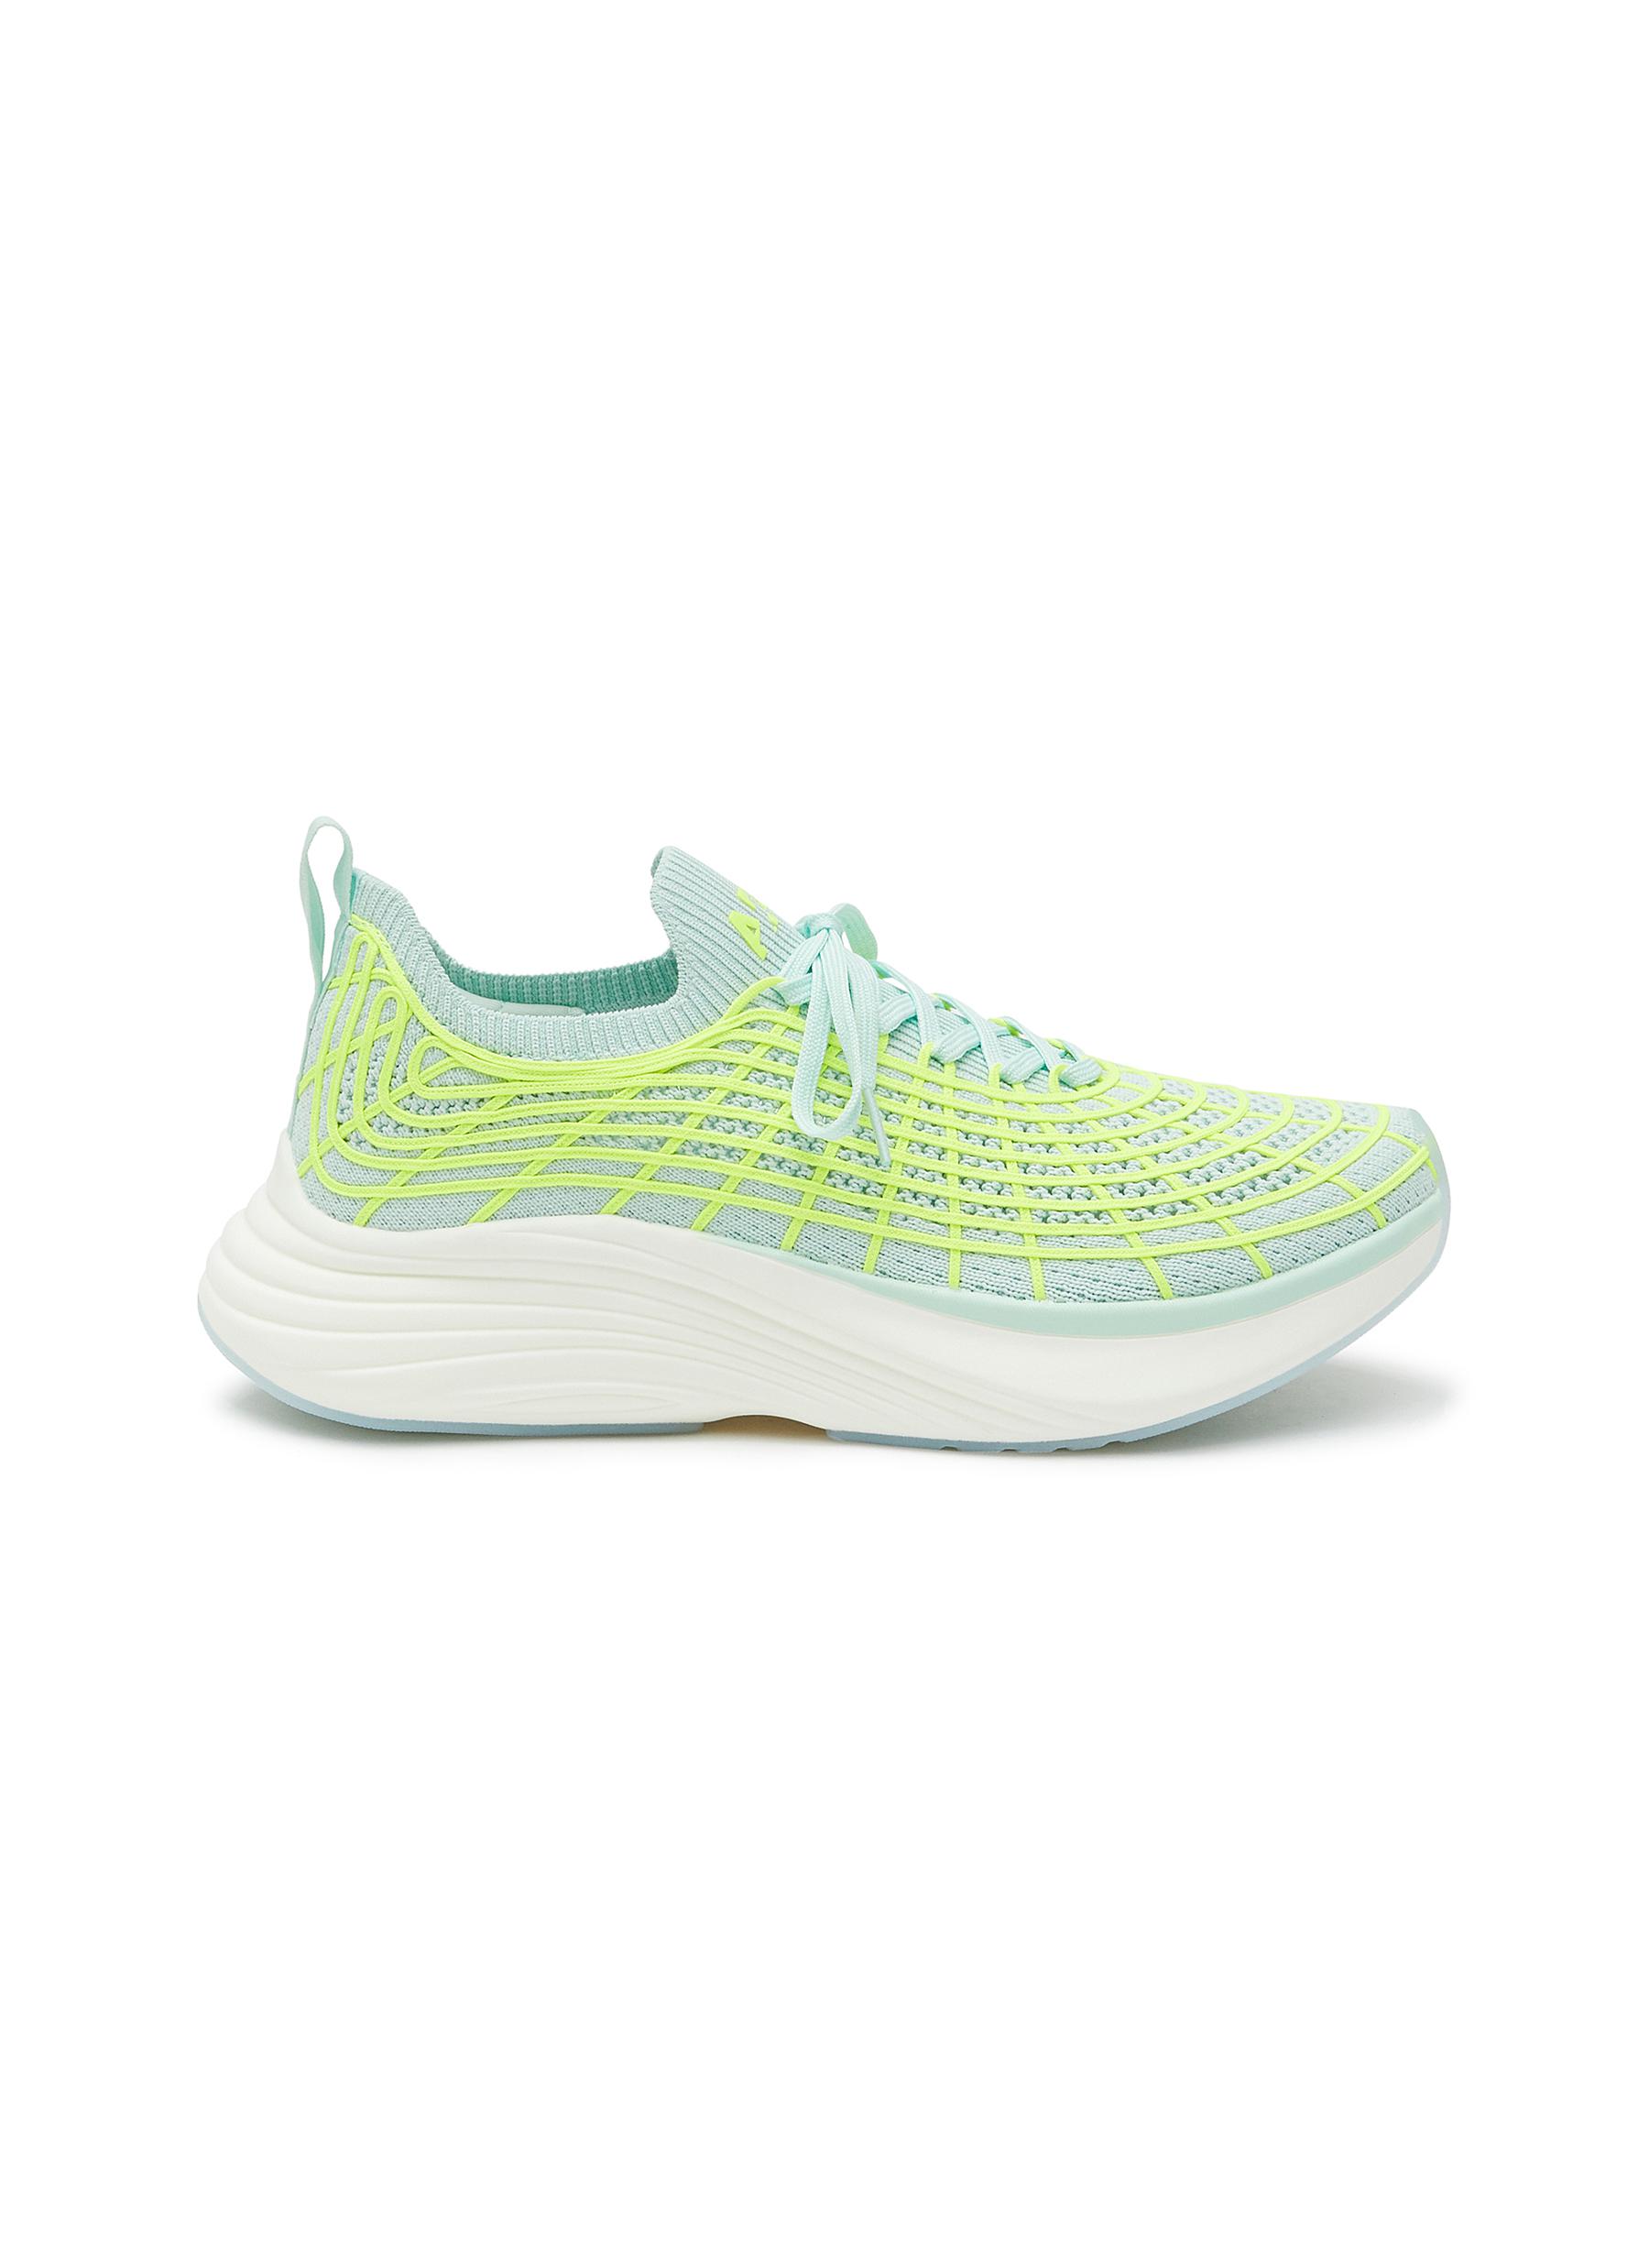 ATHLETIC PROPULSION LABS ‘ZIPLINE' LOW TOP LACE UP WEB PATTERN SNEAKERS